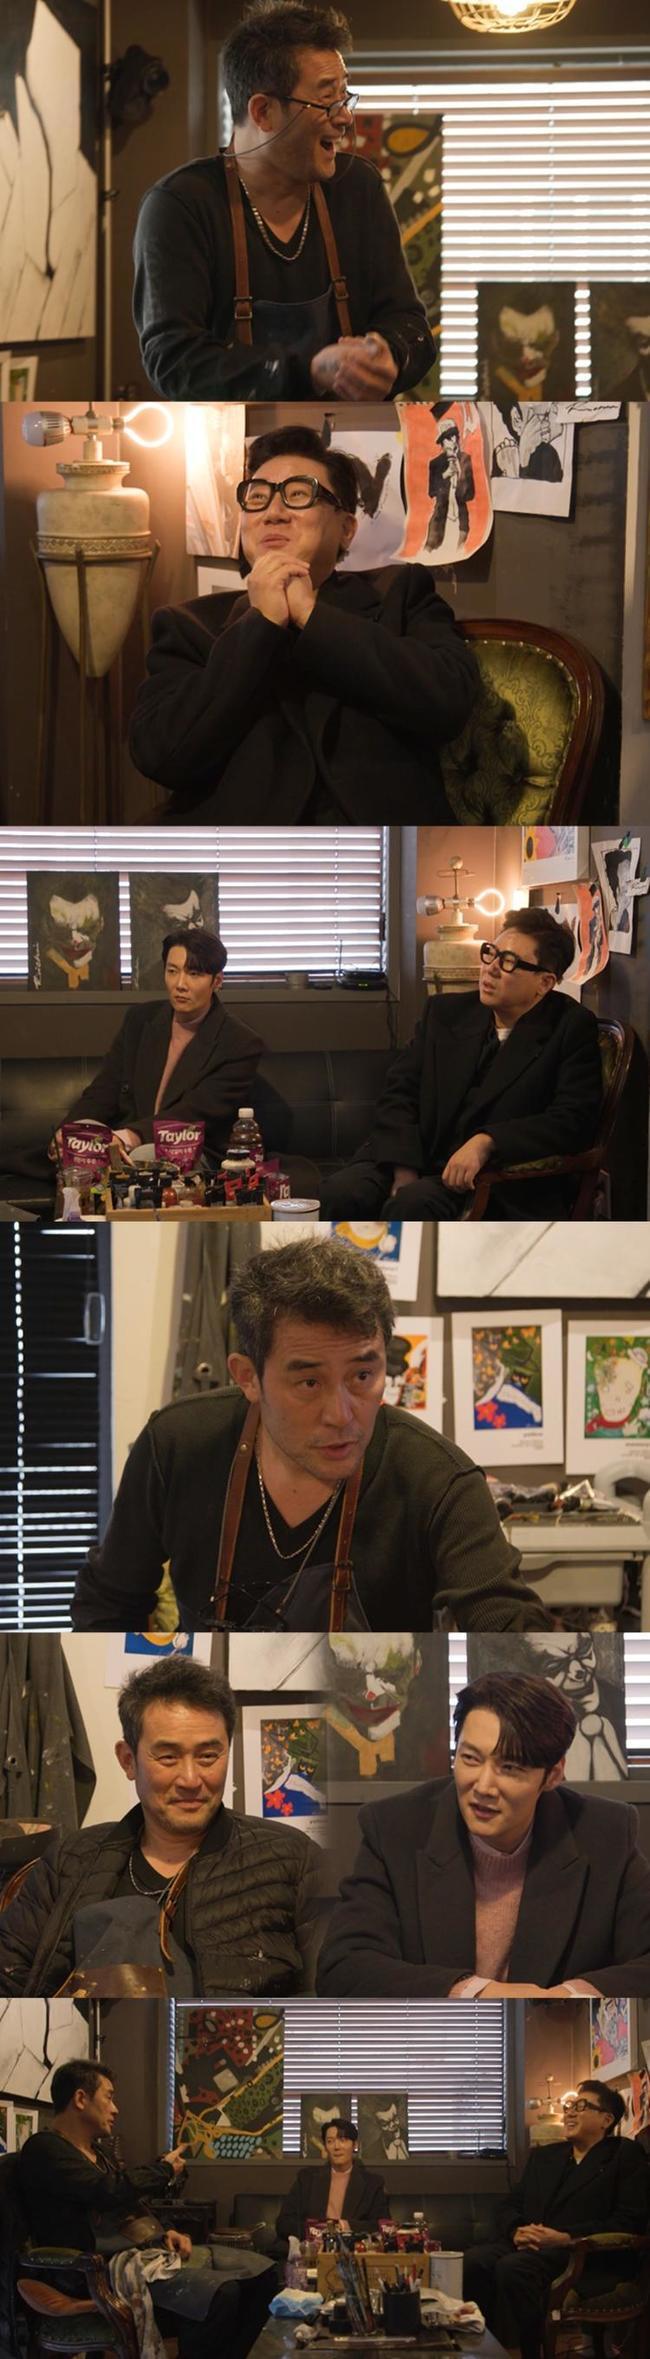 Lee Sang-min and Choi Min-soo face off after 17 yearsOn February 12, SBS entertainment  ⁇  My Little Old Boy  ⁇  (My Little Old Boy) shows Lee Sang-min and Choi Jin-hyuk who are looking for the work place of Choi Min-soo, .Choi Jin-hyuk also recalls Choi Min-soo, who came to his military enlistment day in 2015, and continues his subtle friendship with Lee Sang-min.Choi Min-soo is going to attend the pro-professional event, which appears everywhere with a limited number of people.Choi Jin-hyuk notes that Choi Min-soo appeared in the sauna and surprised the surroundings by performing a strange stretching motion between the cold and hot water.Choi Min-soo said that he did not want to talk about it, and he could not hide his embarrassment.